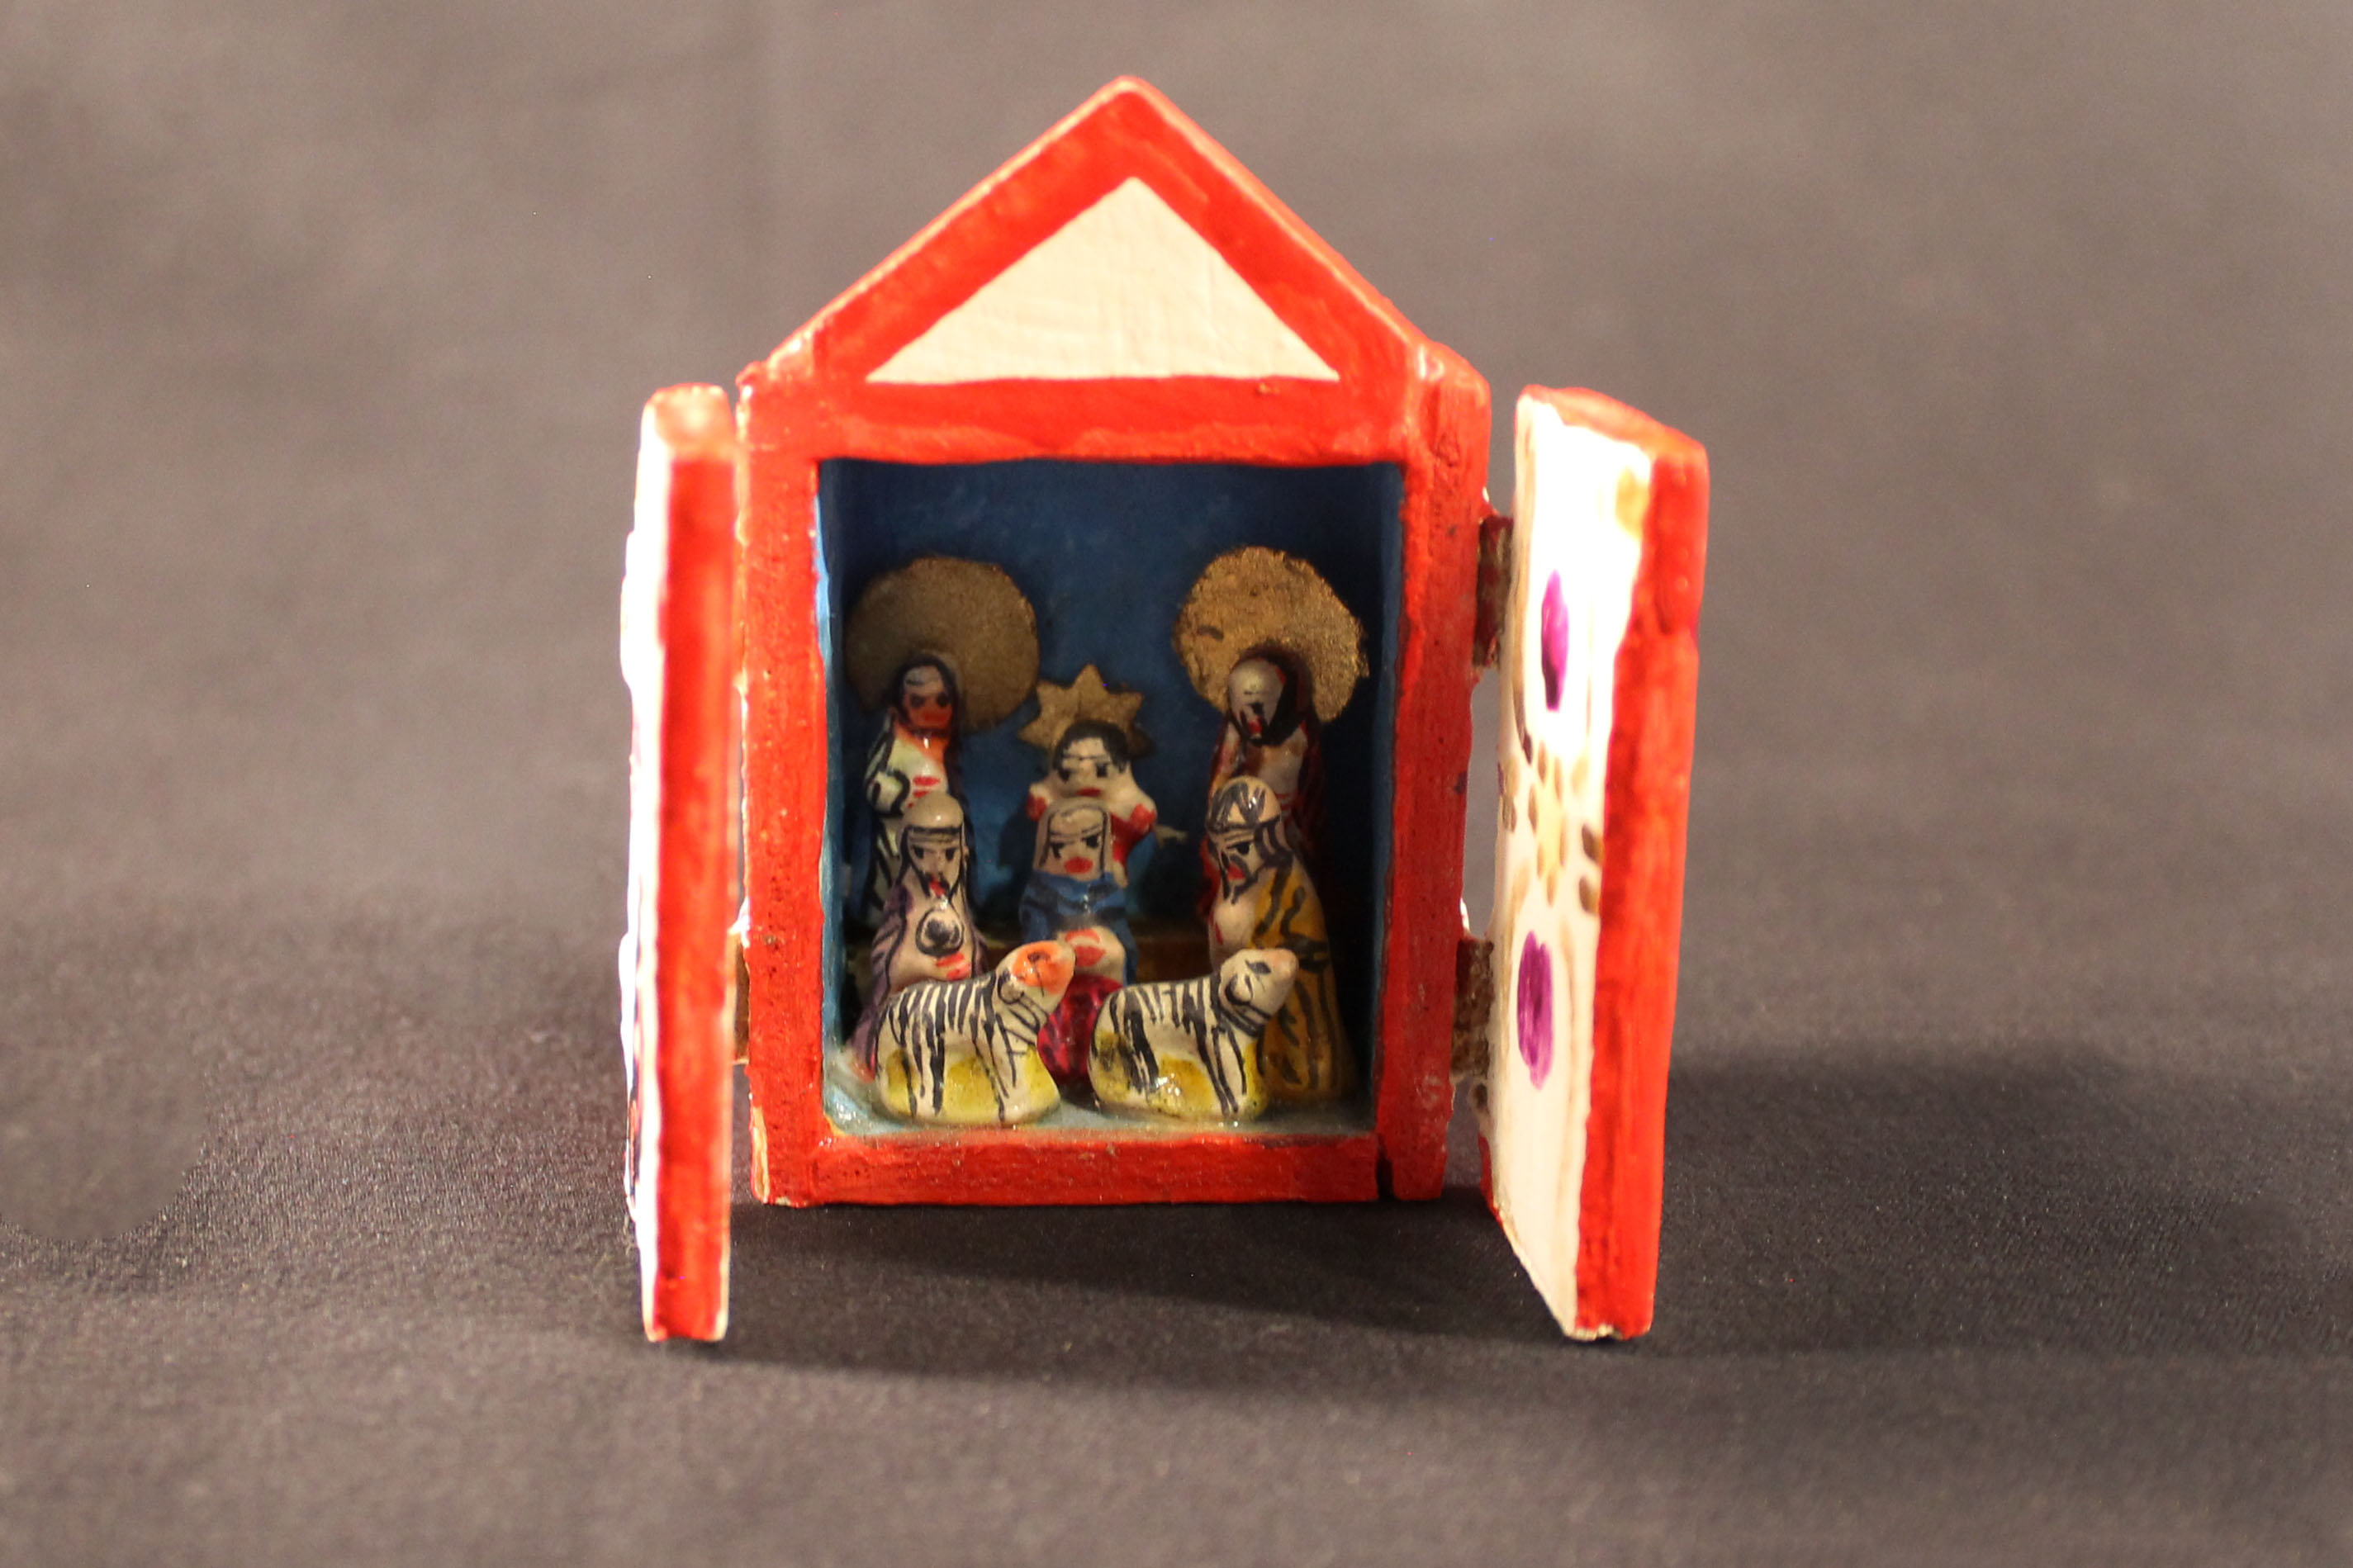 Mini wood nativity scene with two hinged doors that open to show six figures and two animals.